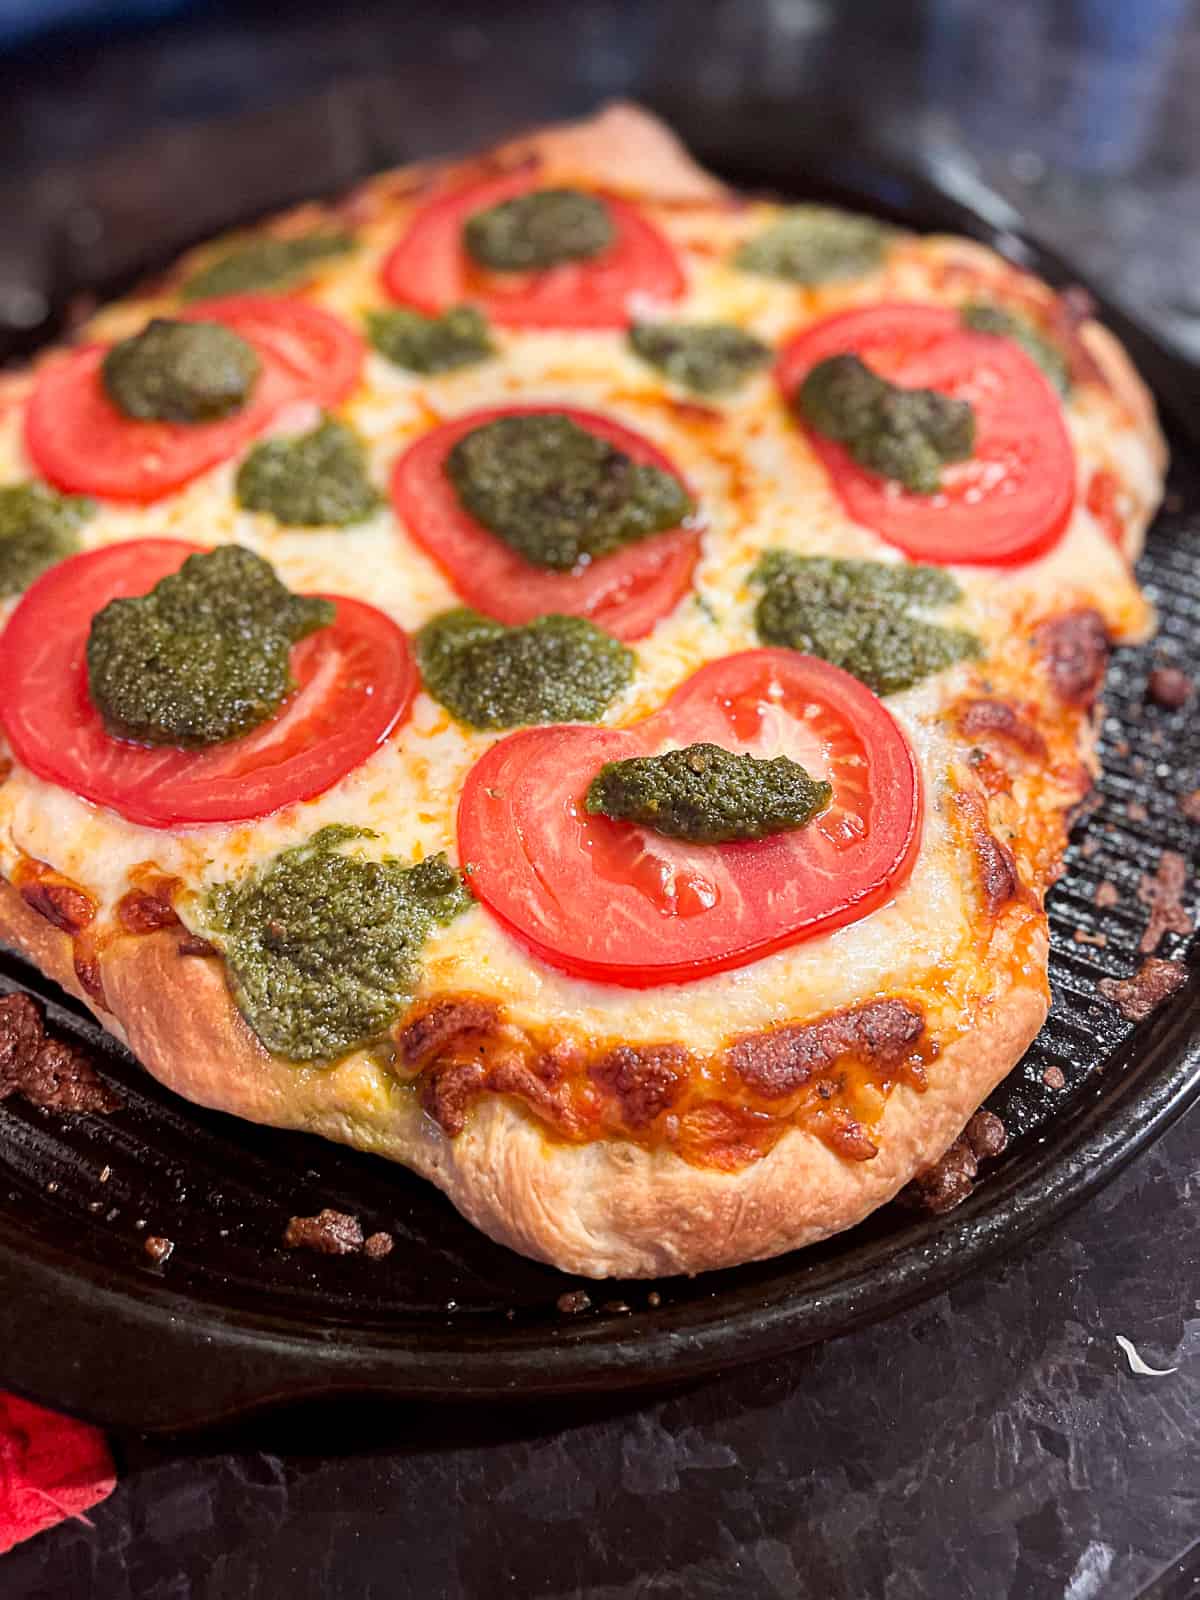 Pizza Stone Baked Pizza With Basil Pesto Sauce